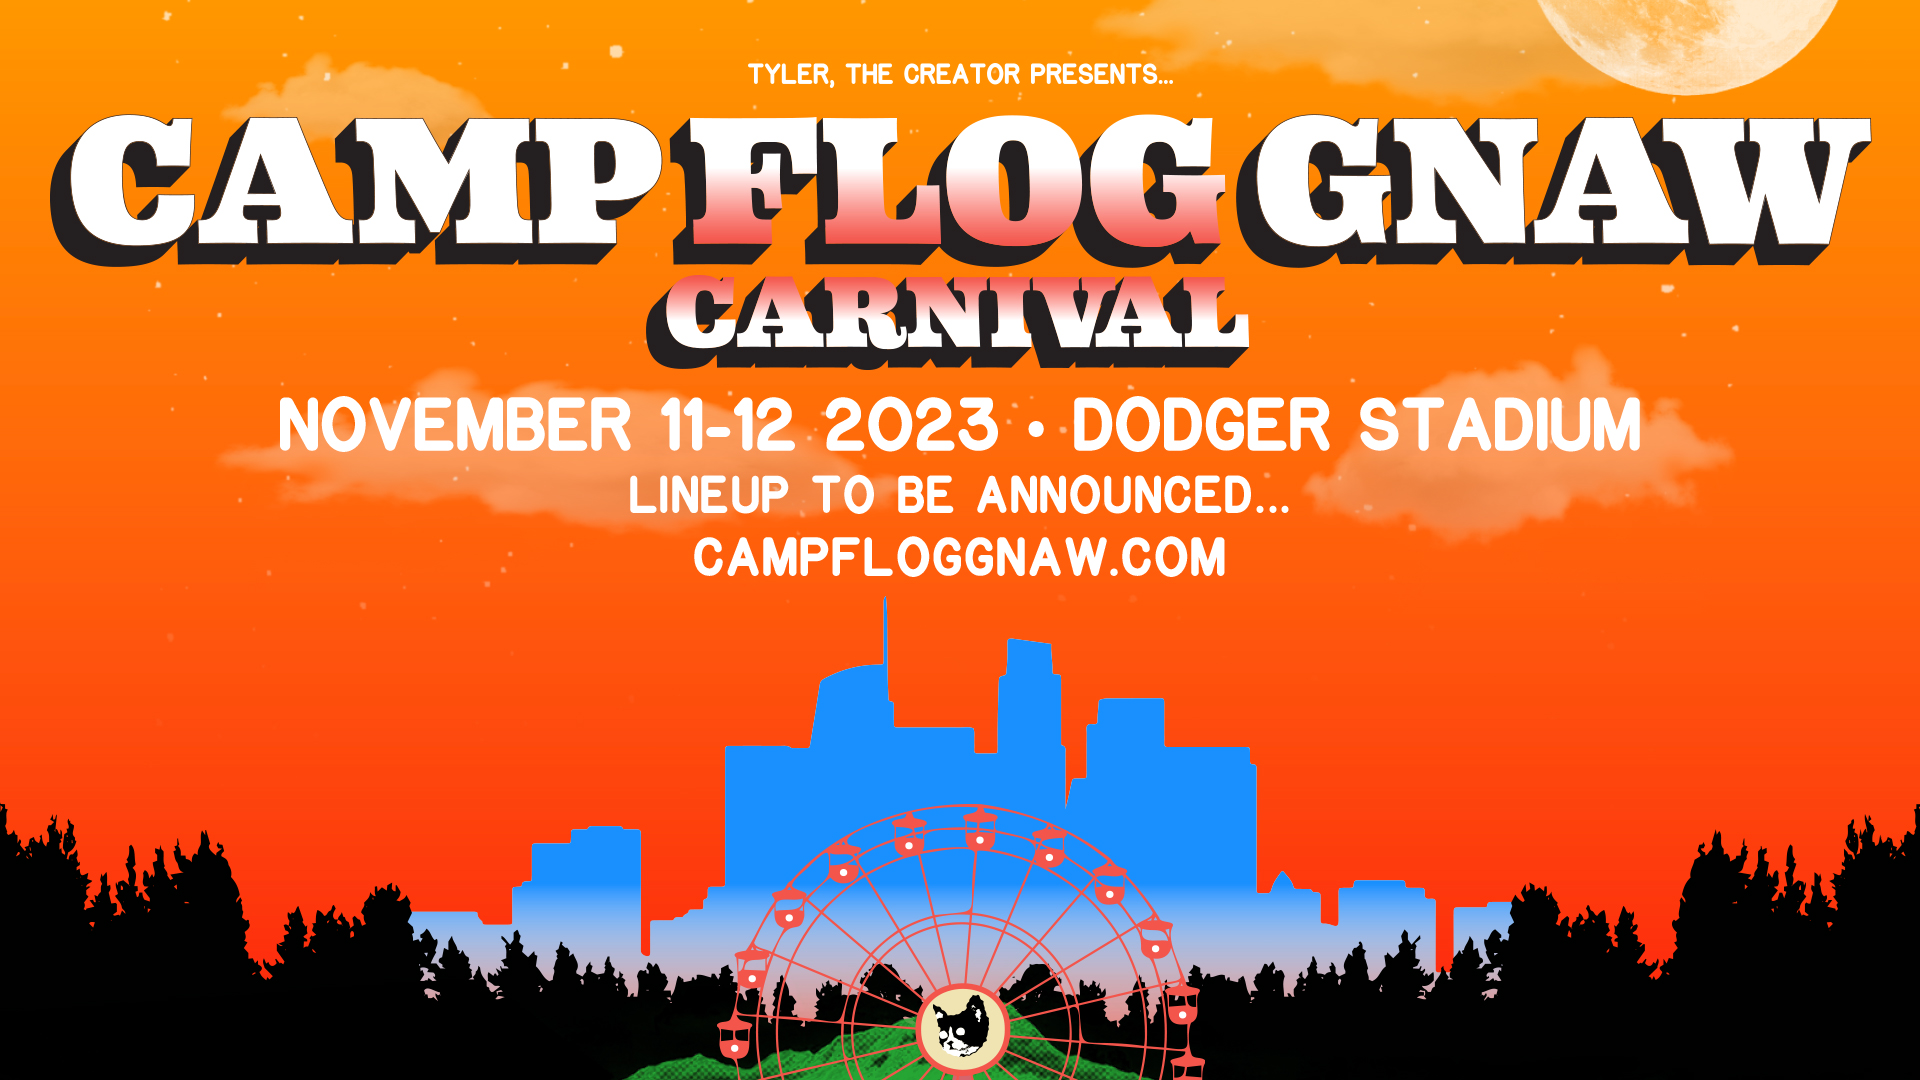 Tyler, the Creator Announces Camp Flog Gnaw Carnival 2023 at Dodger